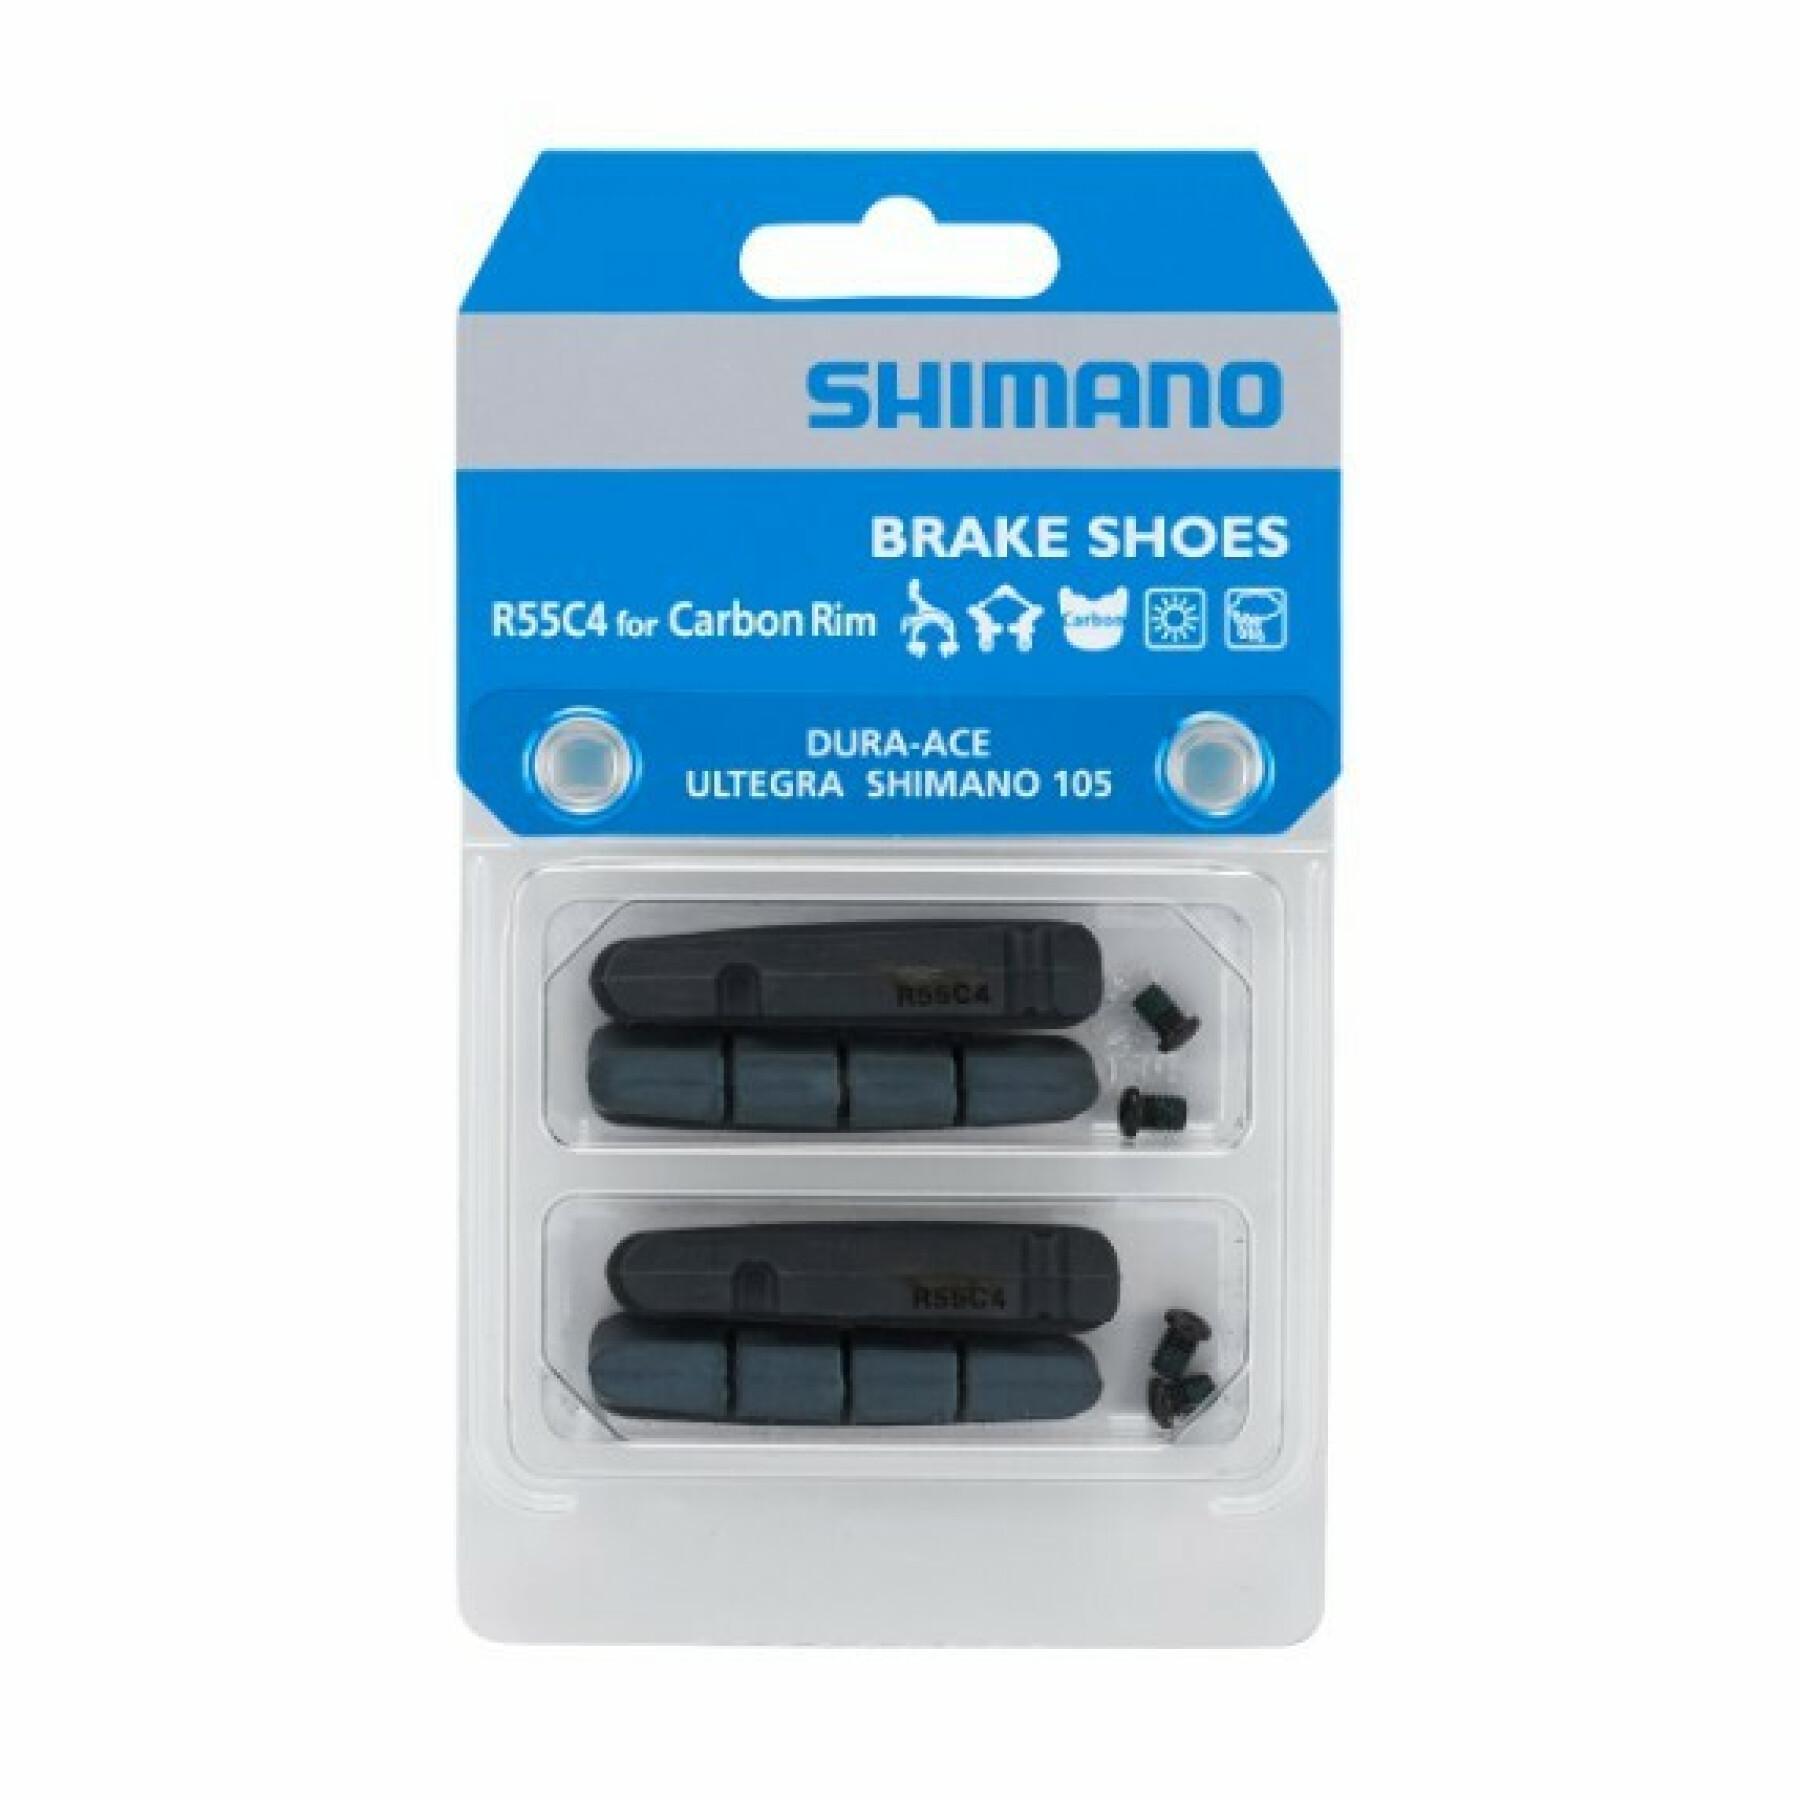 Set of 2 pairs of brake pads r55c4 and fixing bolts for carbon rim Shimano